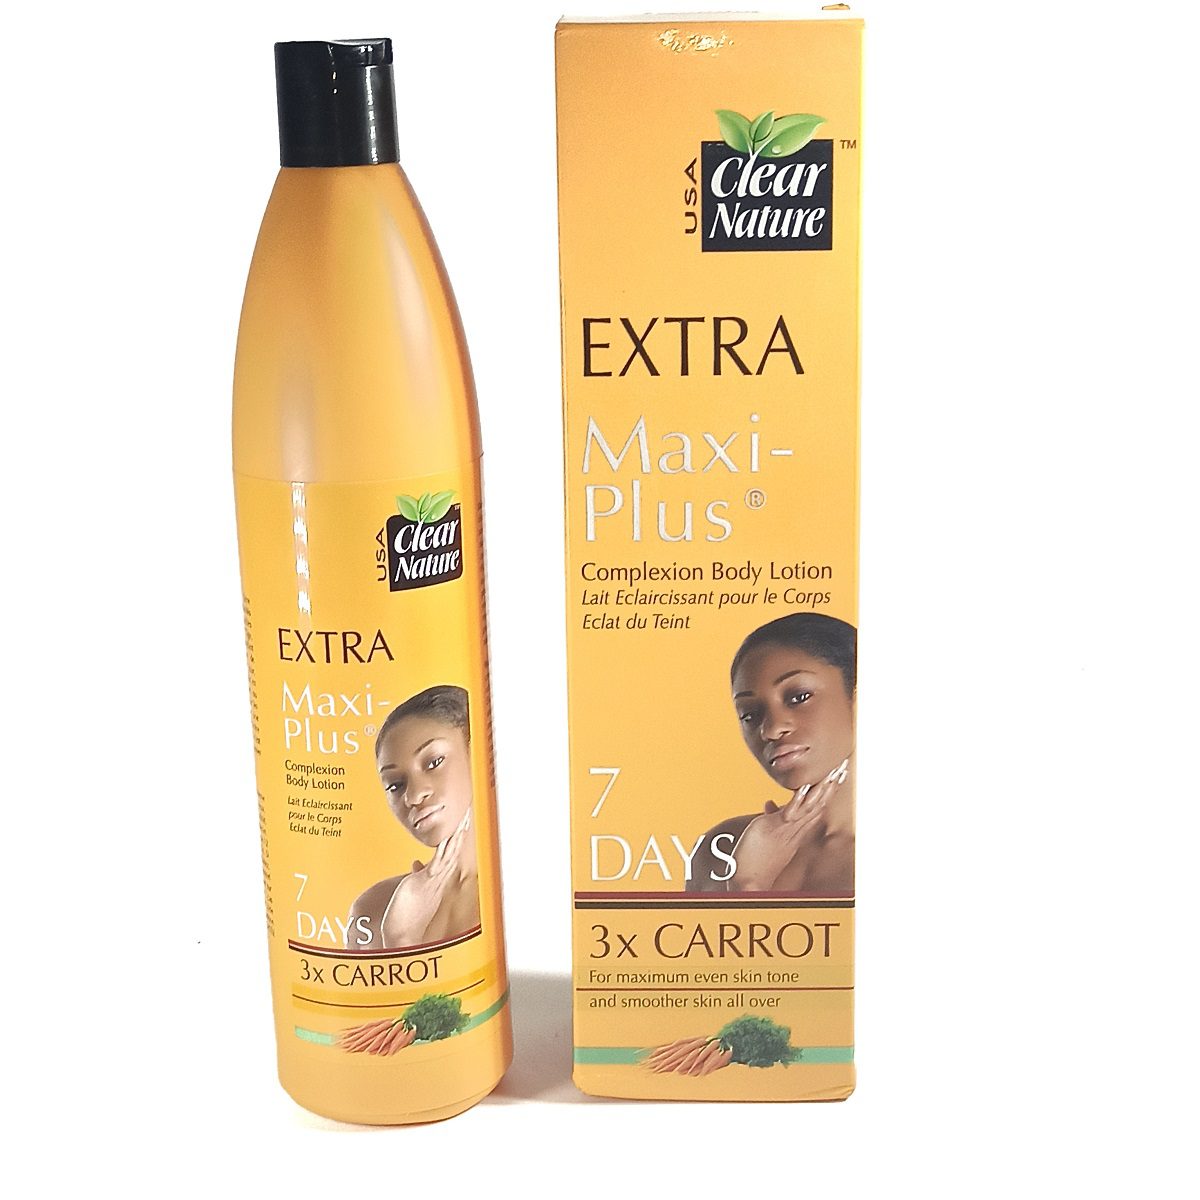 Clear Nature Extra Maxi-Plus 3X Carrot Lotion 500ml | Lami Fragrance